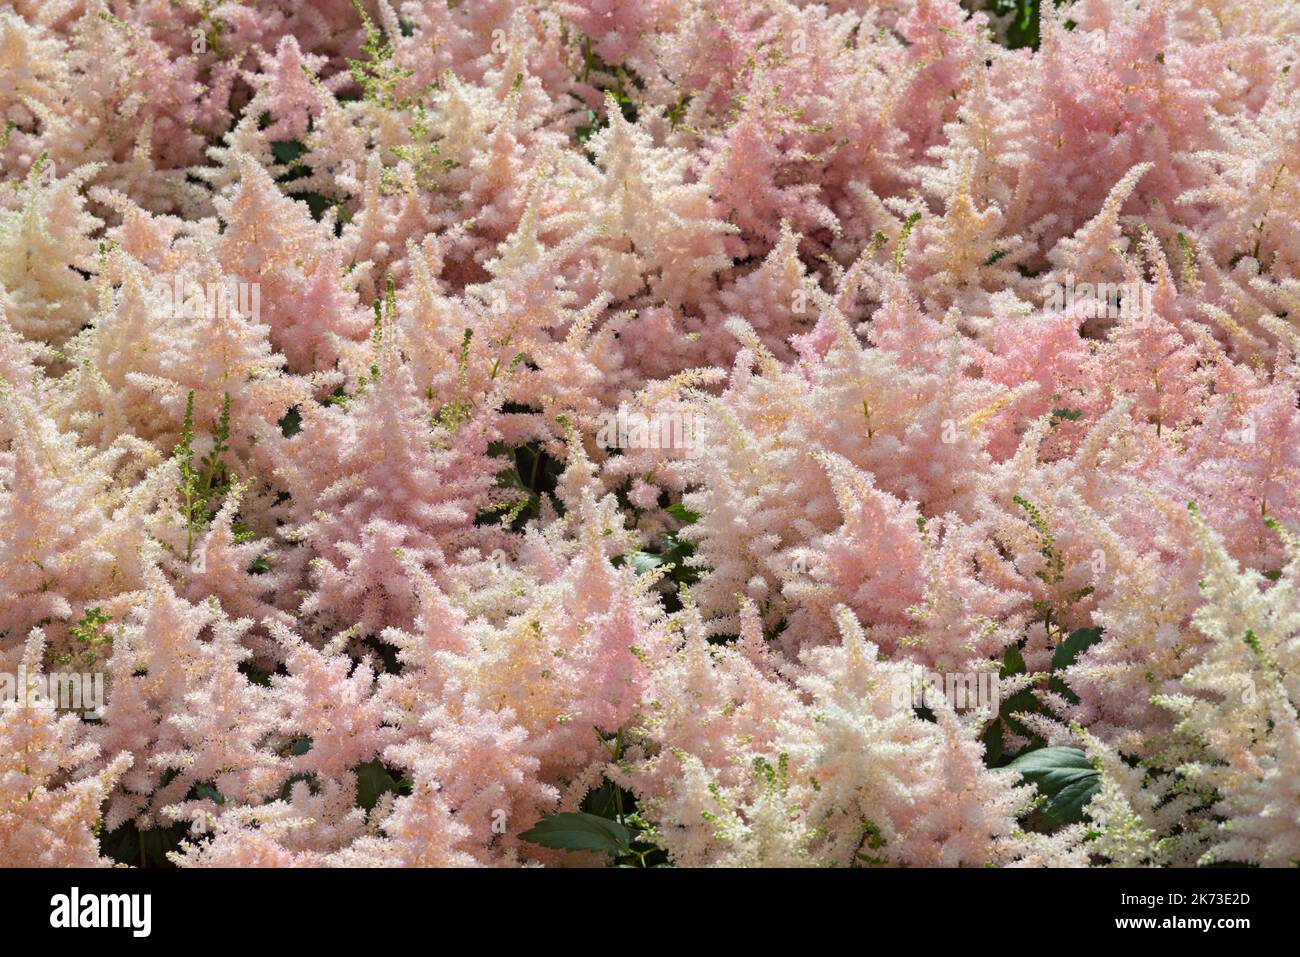 Astilbe Japonica White Flowers Stock Photo